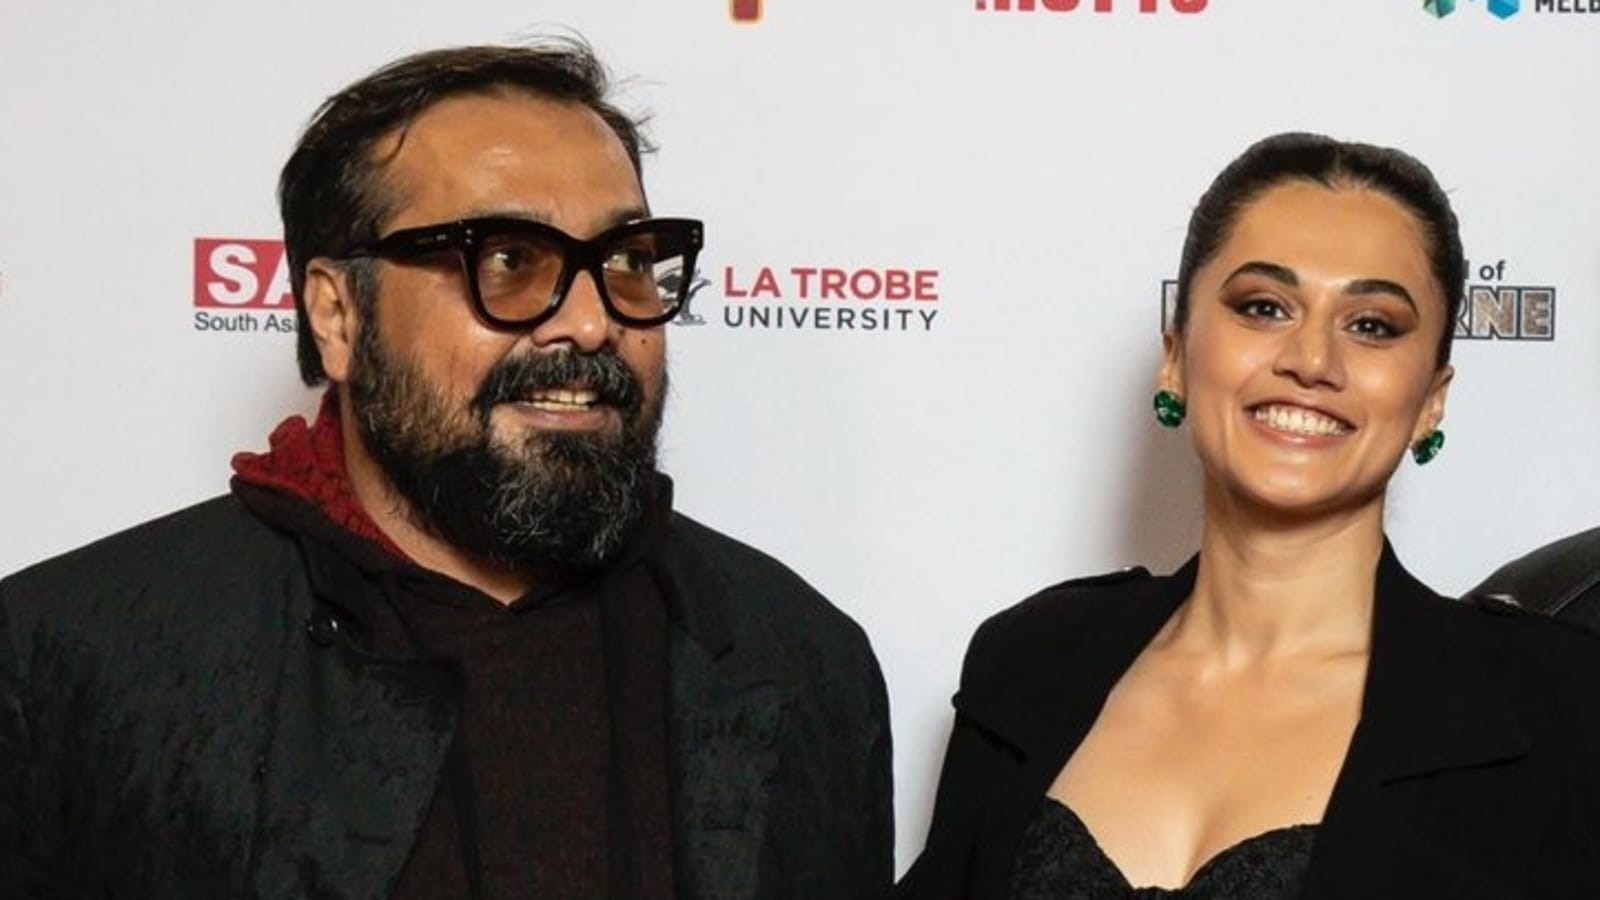 Anurag Kashyap jokes about his body: 'I have bigger boobs than Taapsee  Pannu' | Bollywood - Hindustan Times